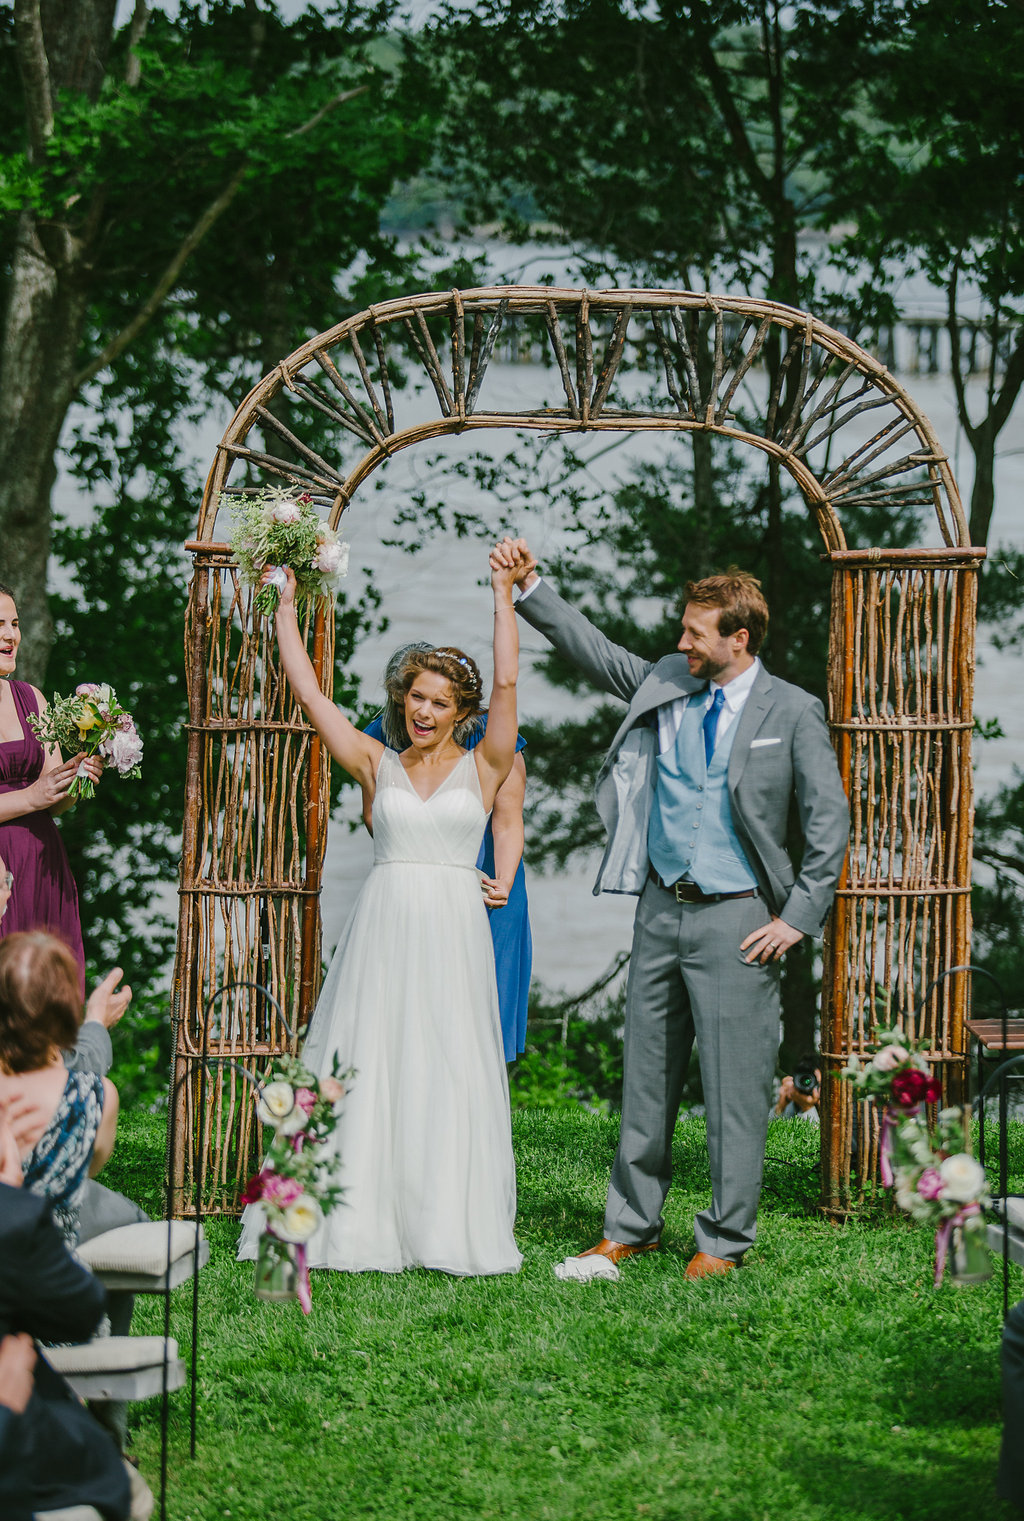 laughter, beer and a broken glass | maine wedding officiant